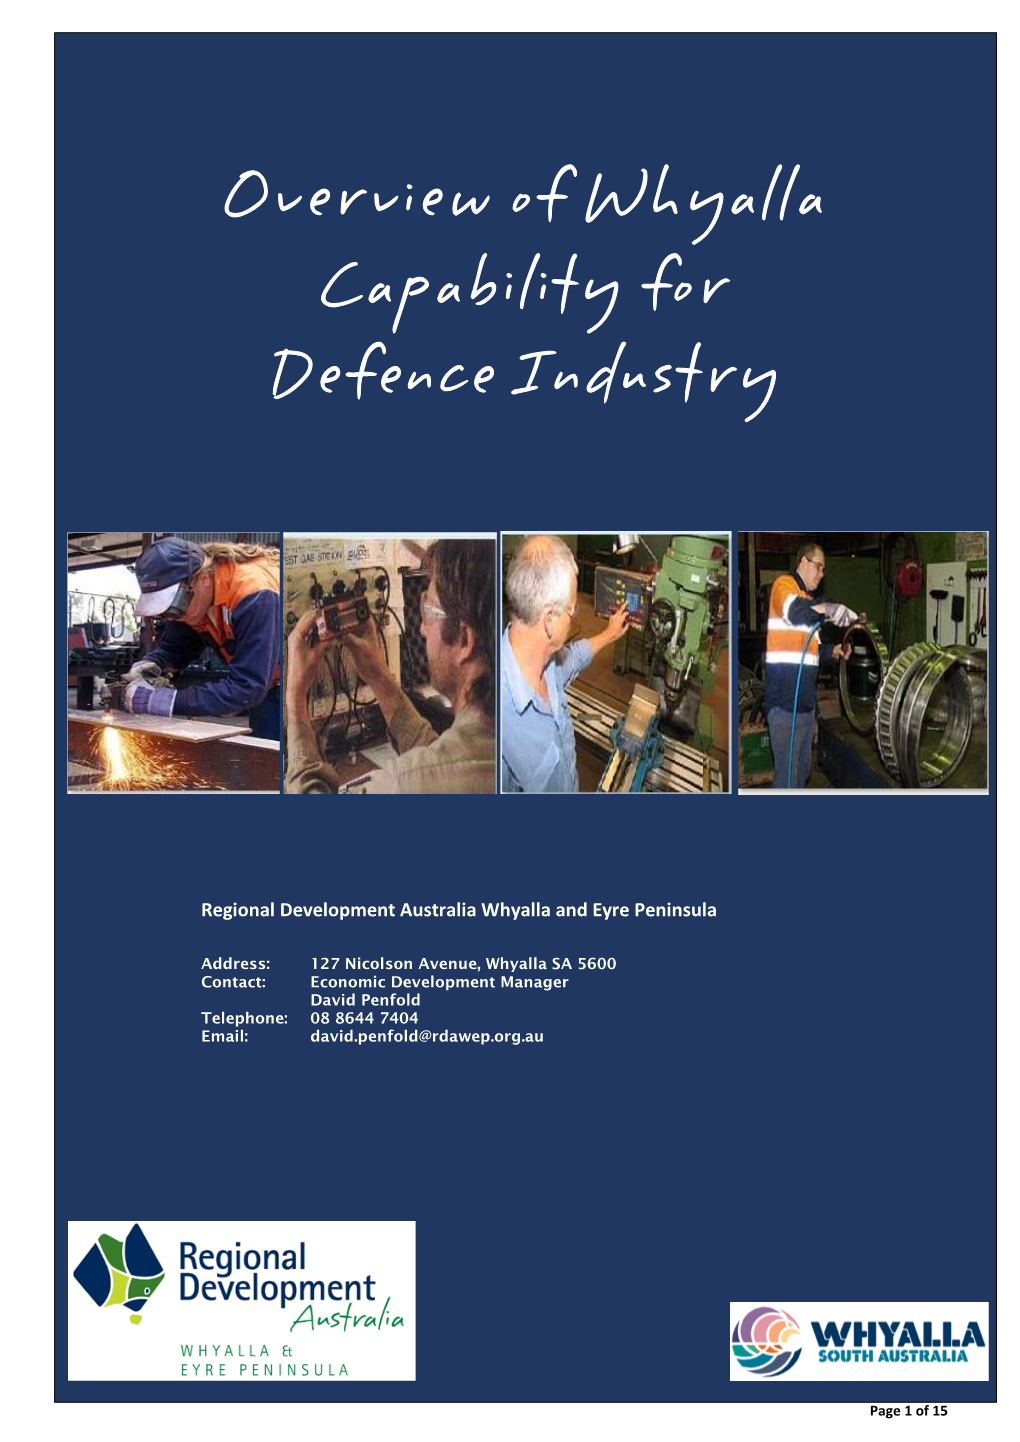 Overview of Whyalla Capability for Defence Industry